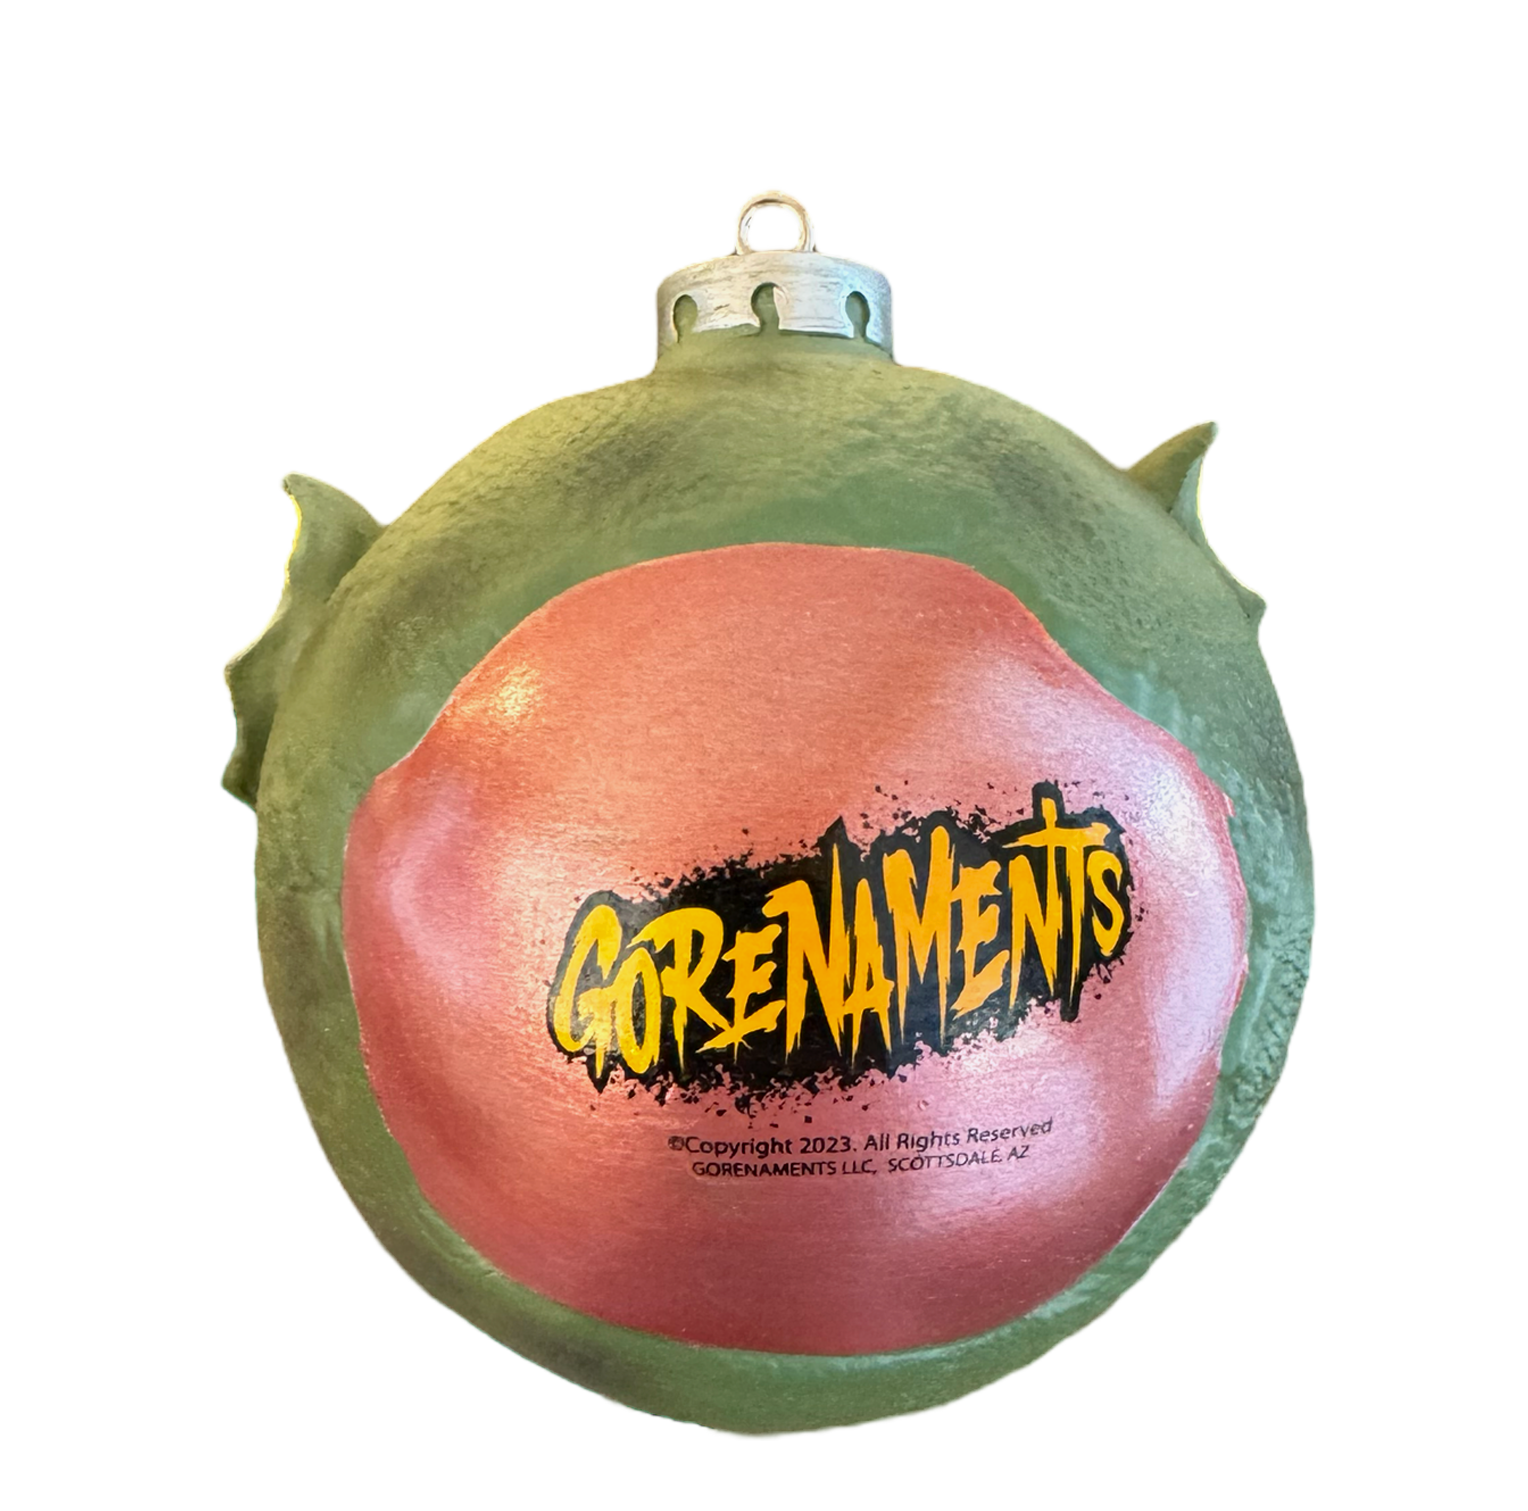 Collectible Horror Themed Ornaments